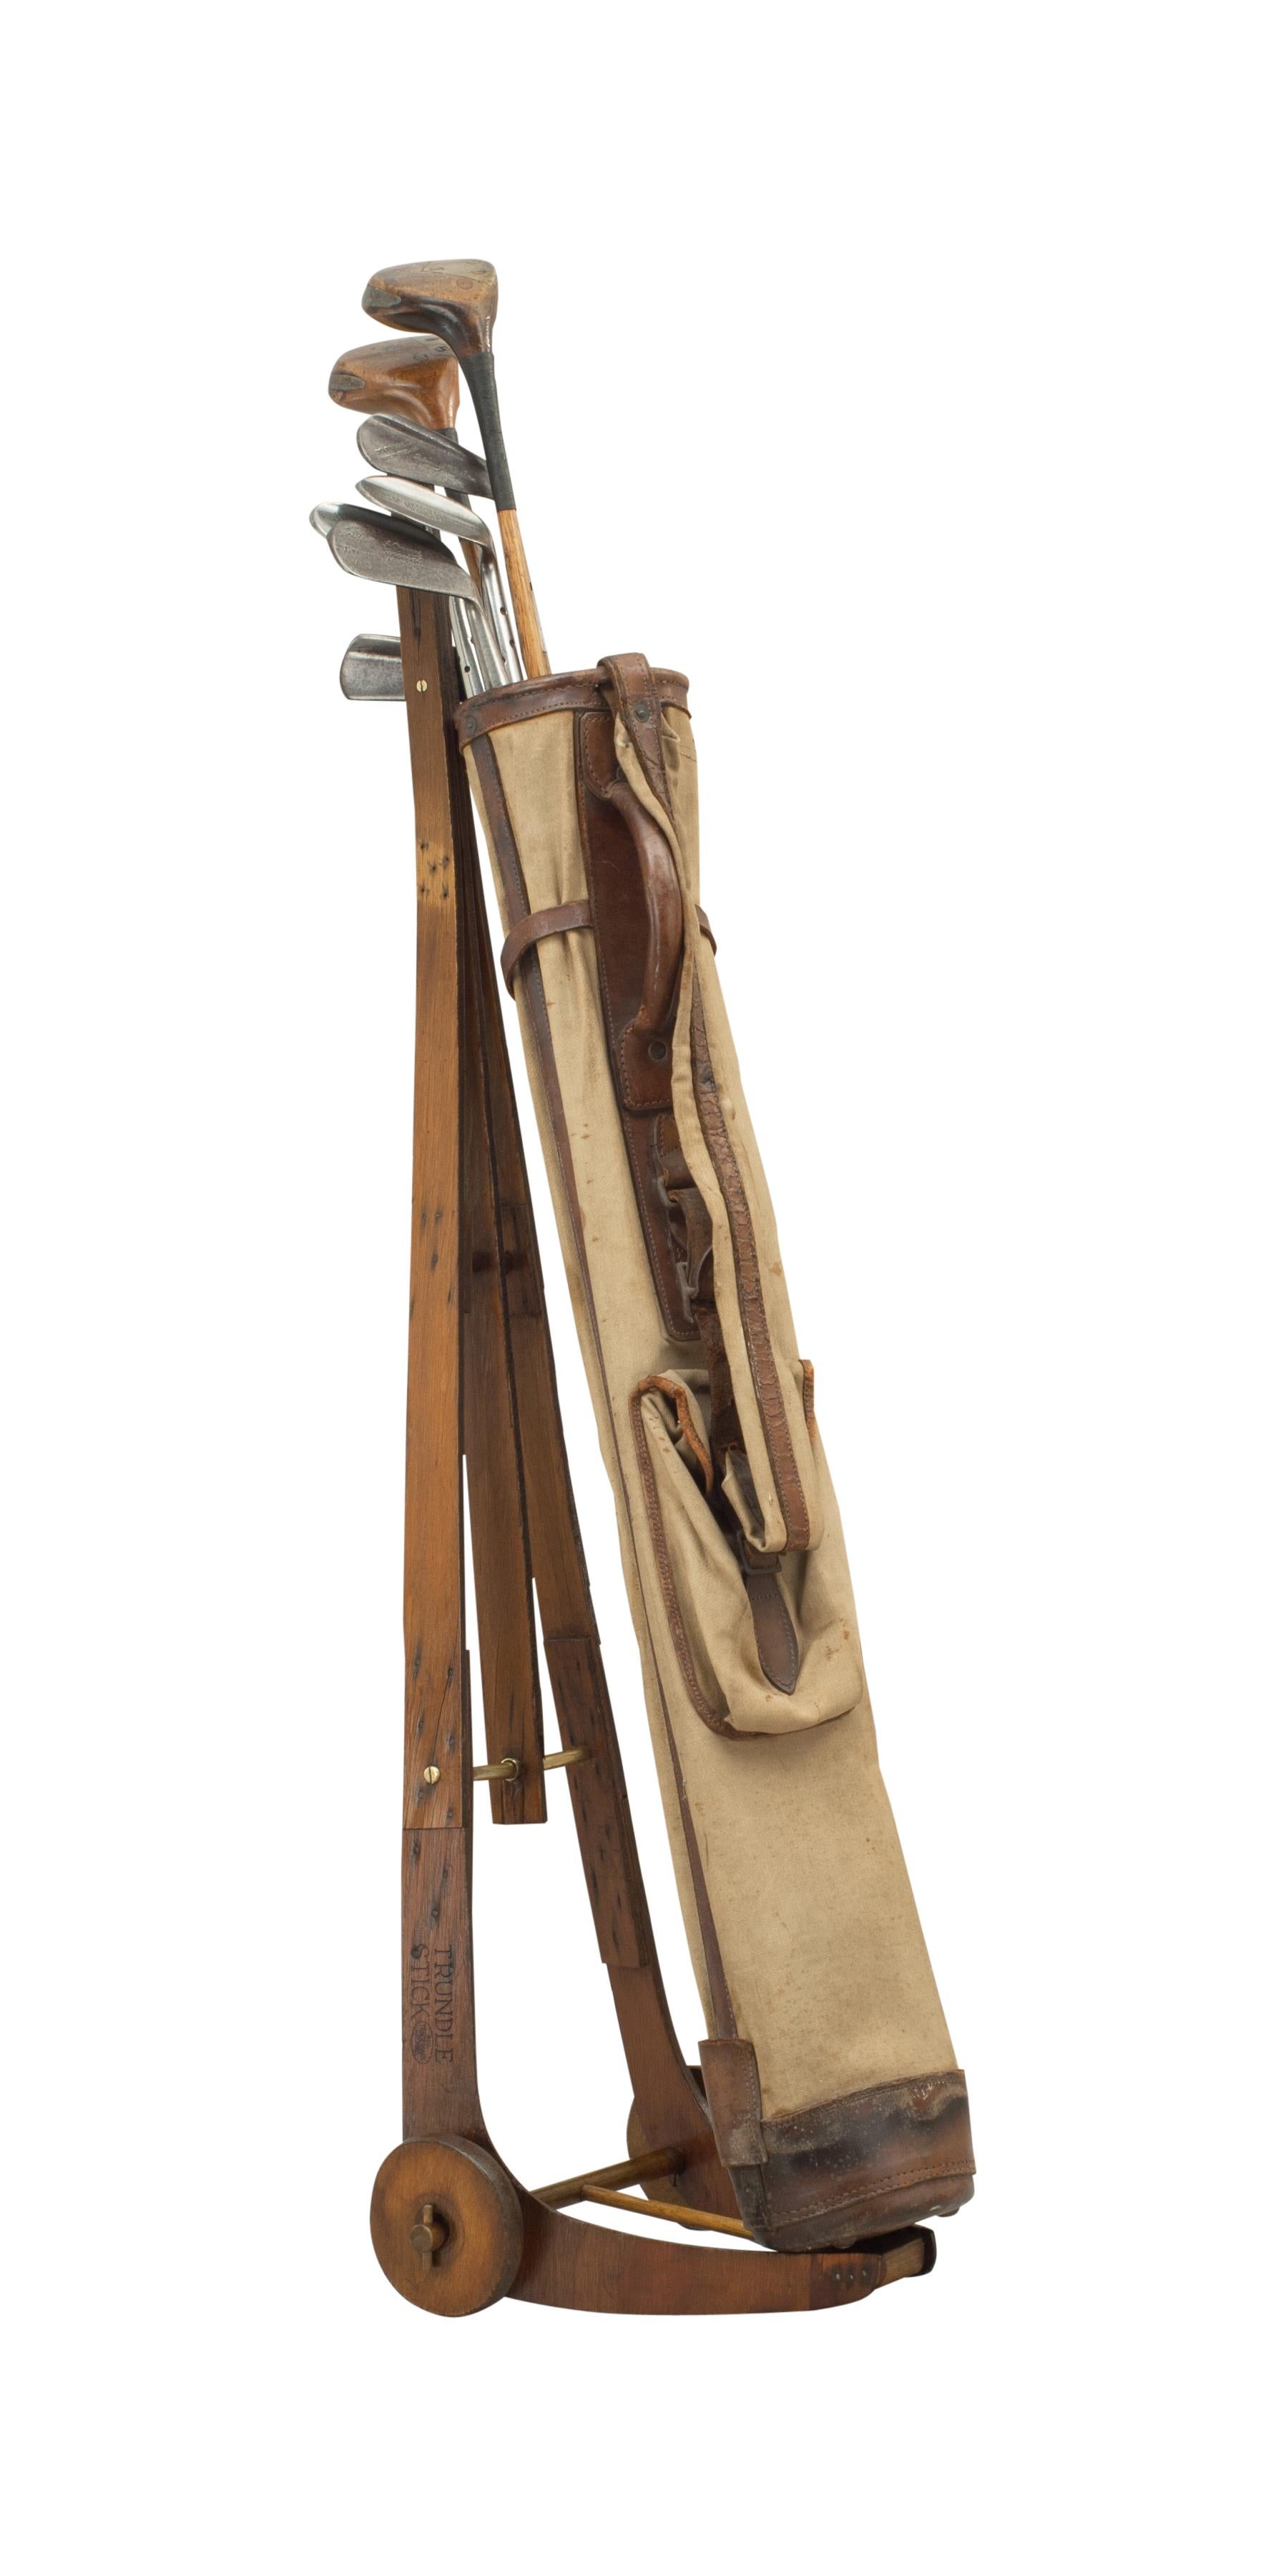 Schotten Canvas Golf Bag in a Vintage 1930s Style at 1stDibs